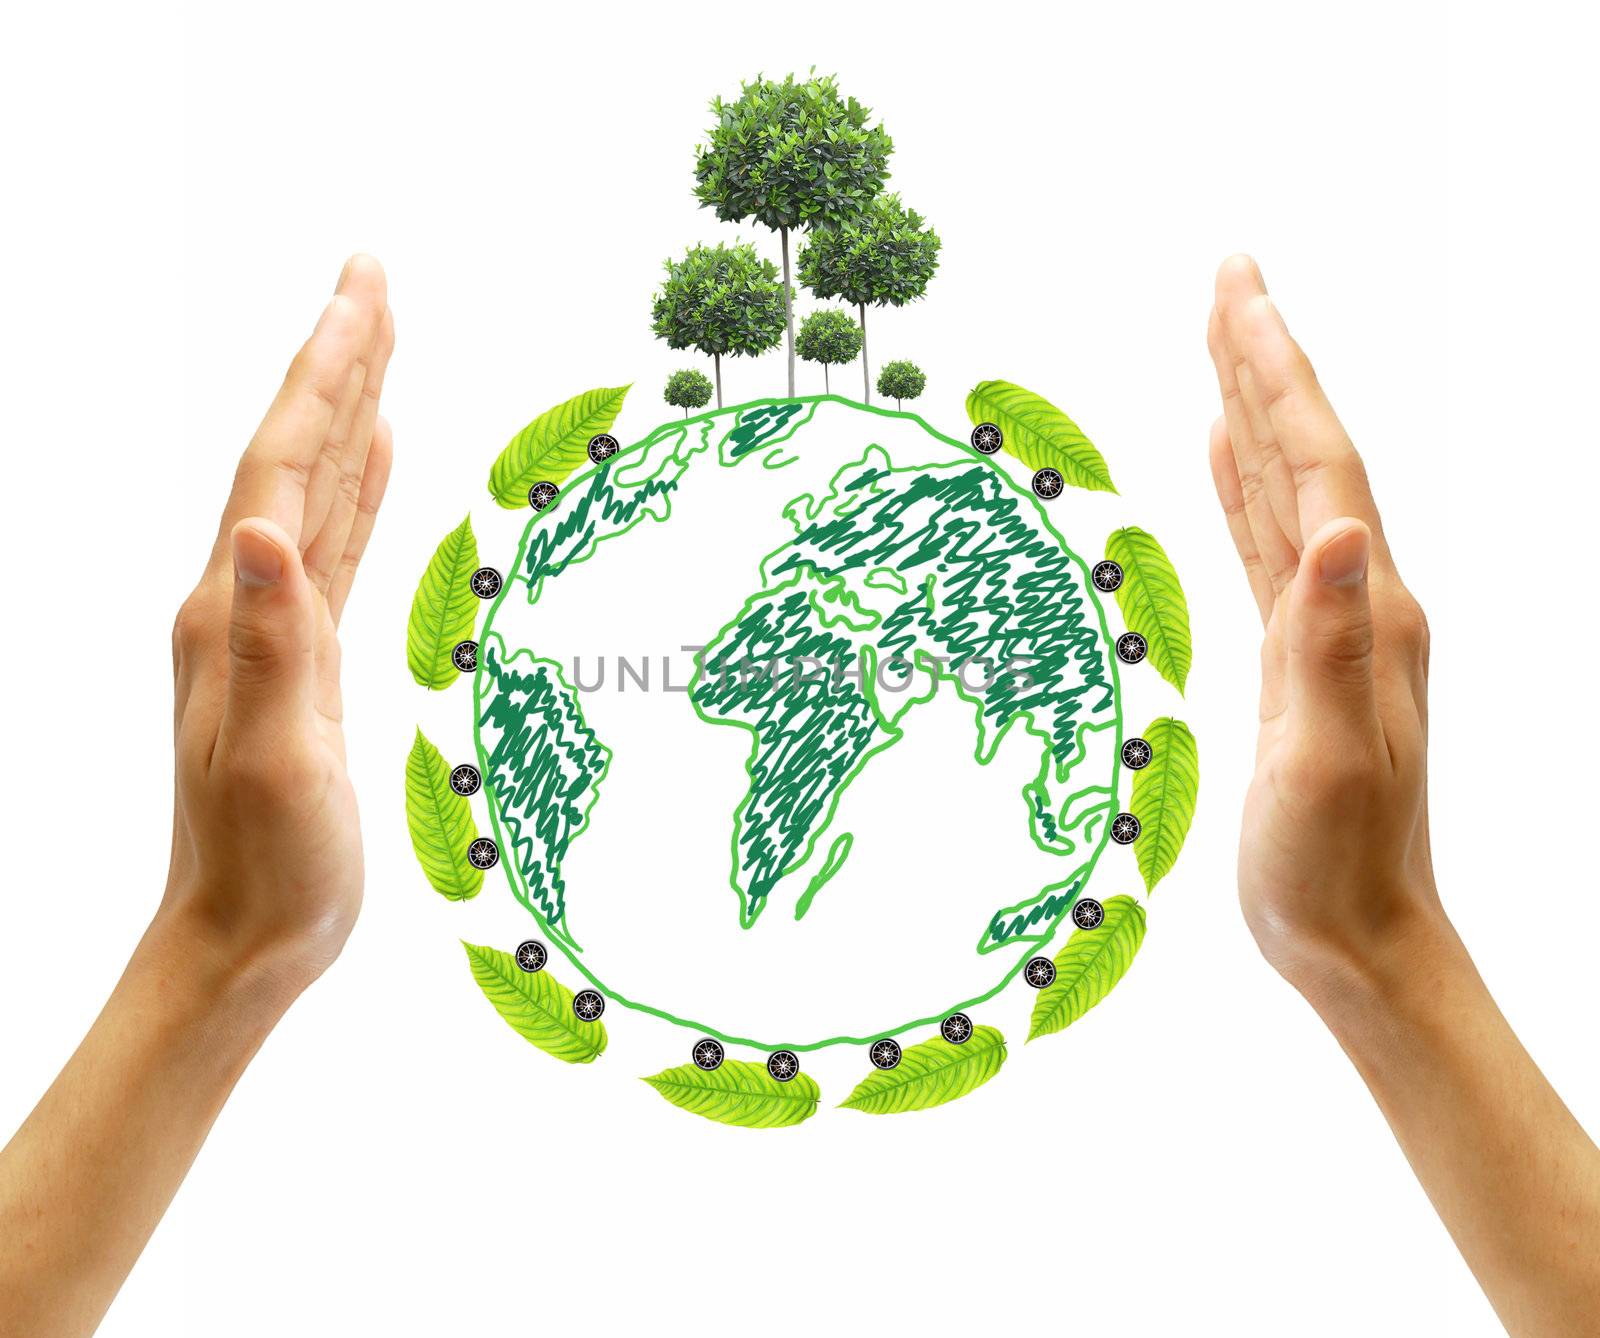 save the planet image composition with the earth by rufous